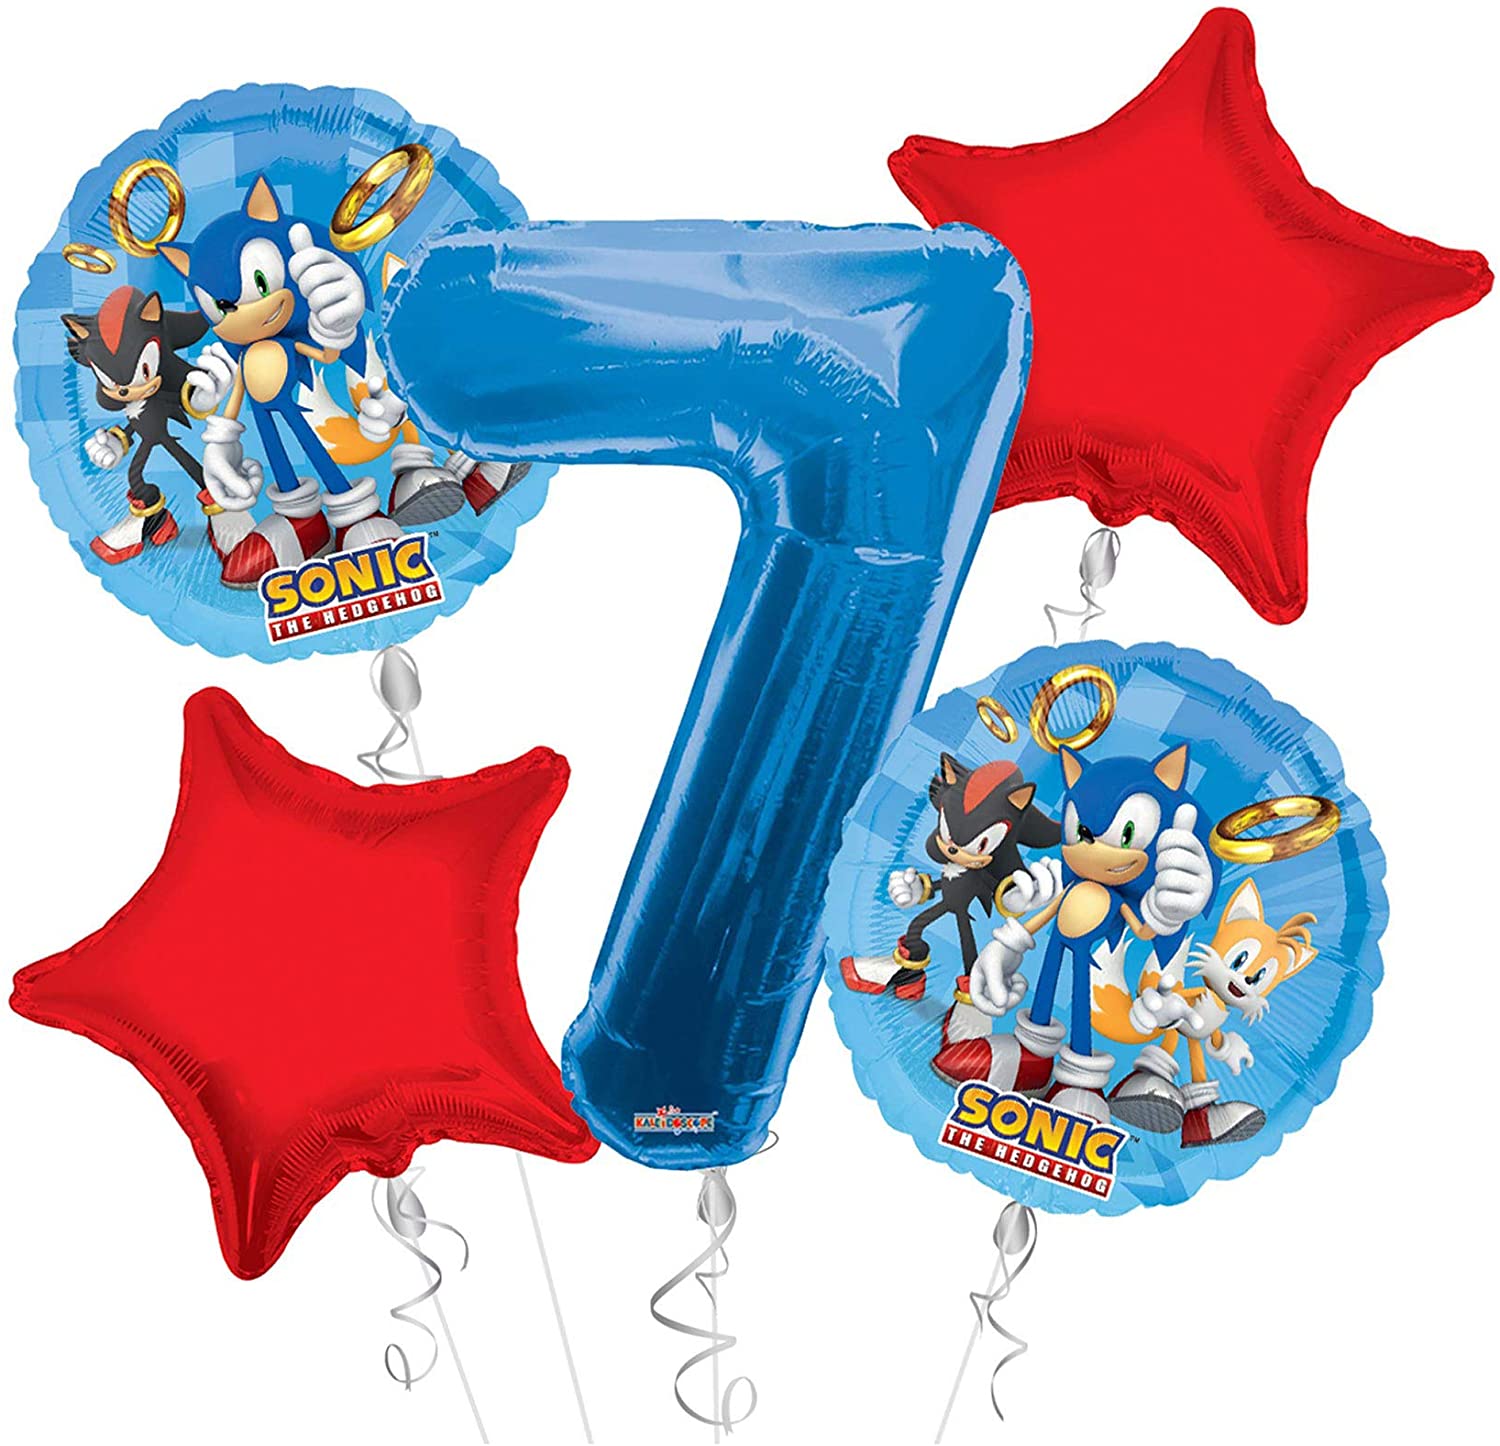 Buy Bouquet Sonic The Hedgehog 2 balloons for only 7.95 USD by Anagram -  Balloons Online